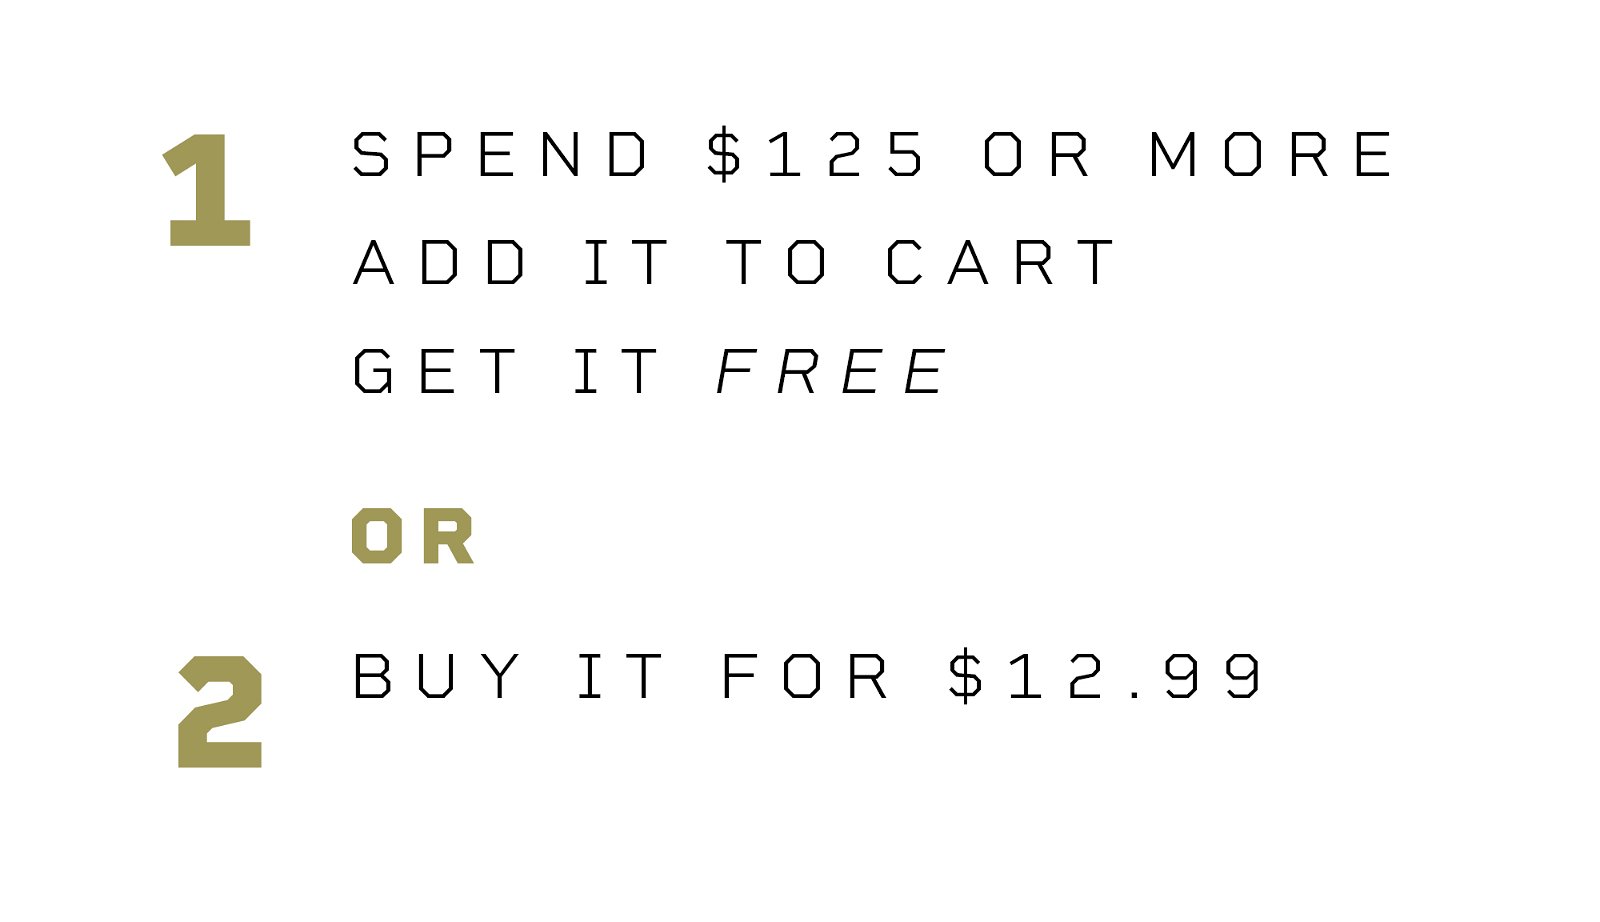 Spend $125+ or more, get it free! Or buy it for $12.99.